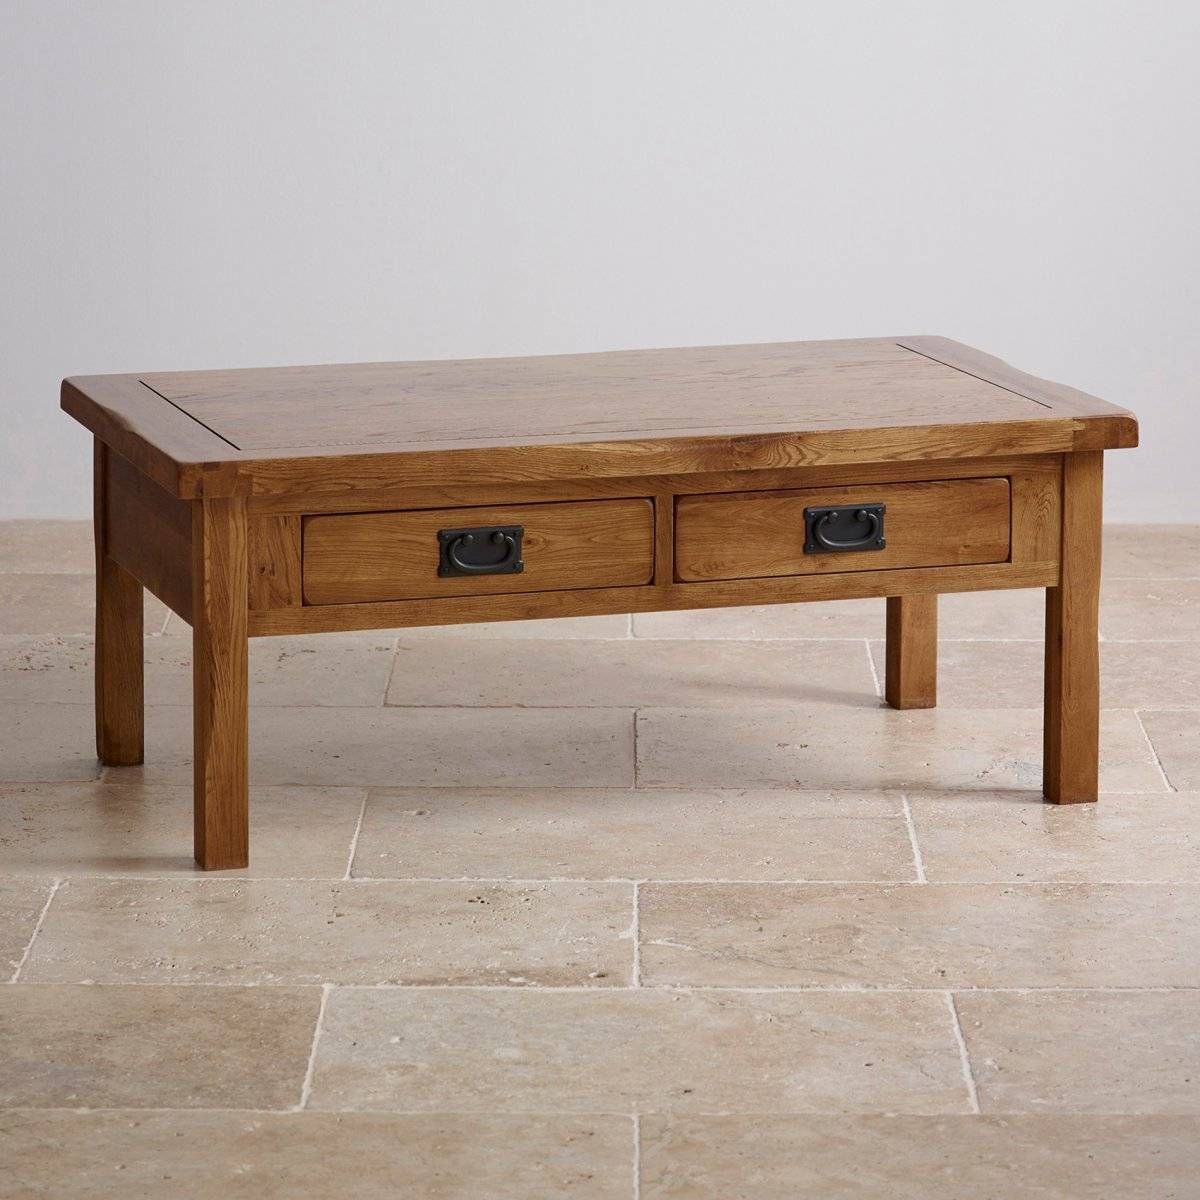 Original Rustic 4 Drawer Coffee Table In Solid Oak With Rustic Oak Coffee Table With Drawers (View 4 of 15)